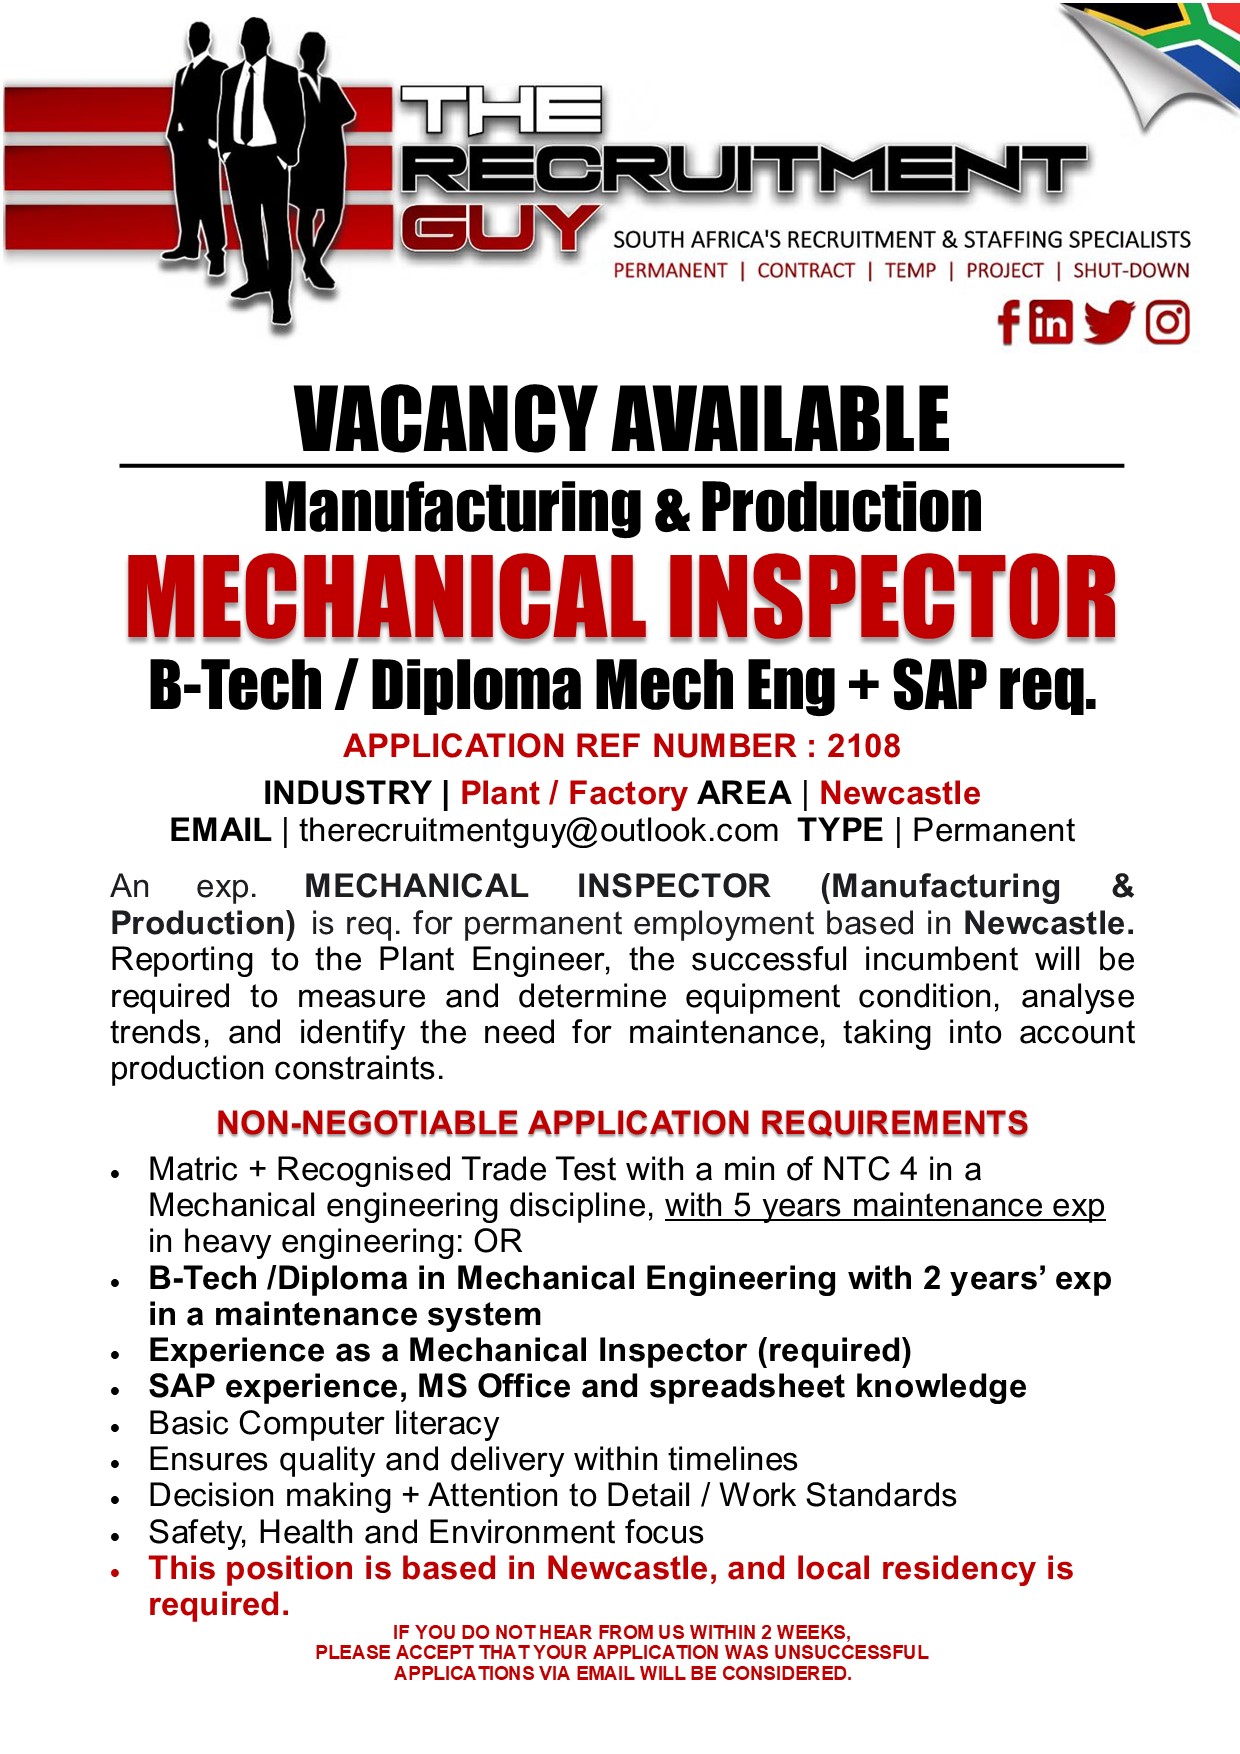 GUY SOUTH AFRICA'S RECRUITMENT &amp; STAFFING SPECIALISTS

PERMANENT | CONTRACT | TEMP | PROJECT | SHUT-DOWN

FOYE
VACANCY AVAILABLE

Manufacturing &amp; Production

MECHANICAL INSPECTOR

B-Tech / Diploma Mech Eng + SAP req.

APPLICATION REF NUMBER : 2108

INDUSTRY | Plant / Factory AREA | Newcastle
EMAIL | therecruitmentguy@outlook.com TYPE | Permanent

An exp. MECHANICAL INSPECTOR (Manufacturing &amp;
Production) is req. for permanent employment based in Newcastle.
Reporting to the Plant Engineer, the successful incumbent will be
required to measure and determine equipment condition, analyse
trends, and identify the need for maintenance, taking into account
production constraints.

NON-NEGOTIABLE APPLICATION REQUIREMENTS
+ Matric + Recognised Trade Test with a min of NTC 4 in a
Mechanical engineering discipline, with 5 years maintenance exp
in heavy engineering: OR
. B-Tech /Diploma in Mechanical Engineering with 2 years’ exp
in a maintenance system
Experience as a Mechanical Inspector (required)
SAP experience, MS Office and spreadsheet knowledge
Basic Computer literacy
Ensures quality and delivery within timelines
Decision making + Attention to Detail / Work Standards
Safety, Health and Environment focus
This position is based in Newcastle, and local residency is
required.
IF YOU DO NOT HEAR FROM US WITHIN 2 WEEKS,

PLEASE ACCEPT THAT YOUR APPLICATION WAS UNSUCCESSFUL
APPLICATIONS VIA EMAIL WILL BE CONSIDERED.